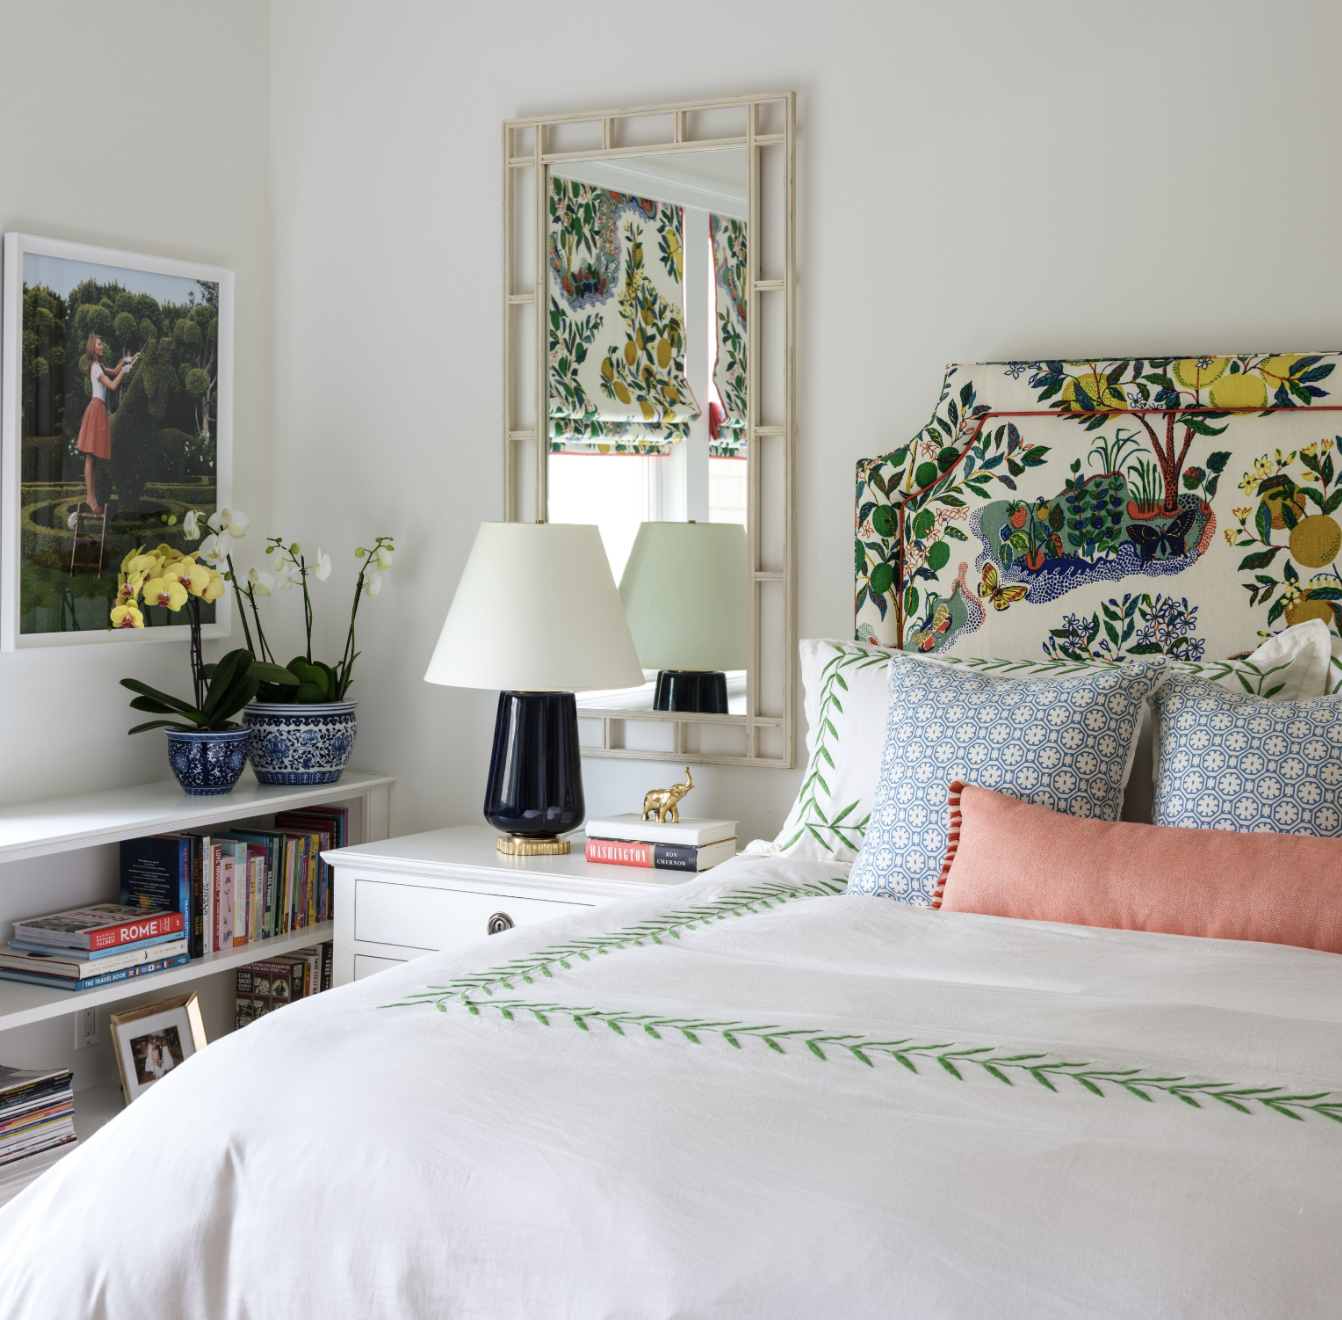 Pretty bedroom - working from home during COVID-19 makes you want to improve your home